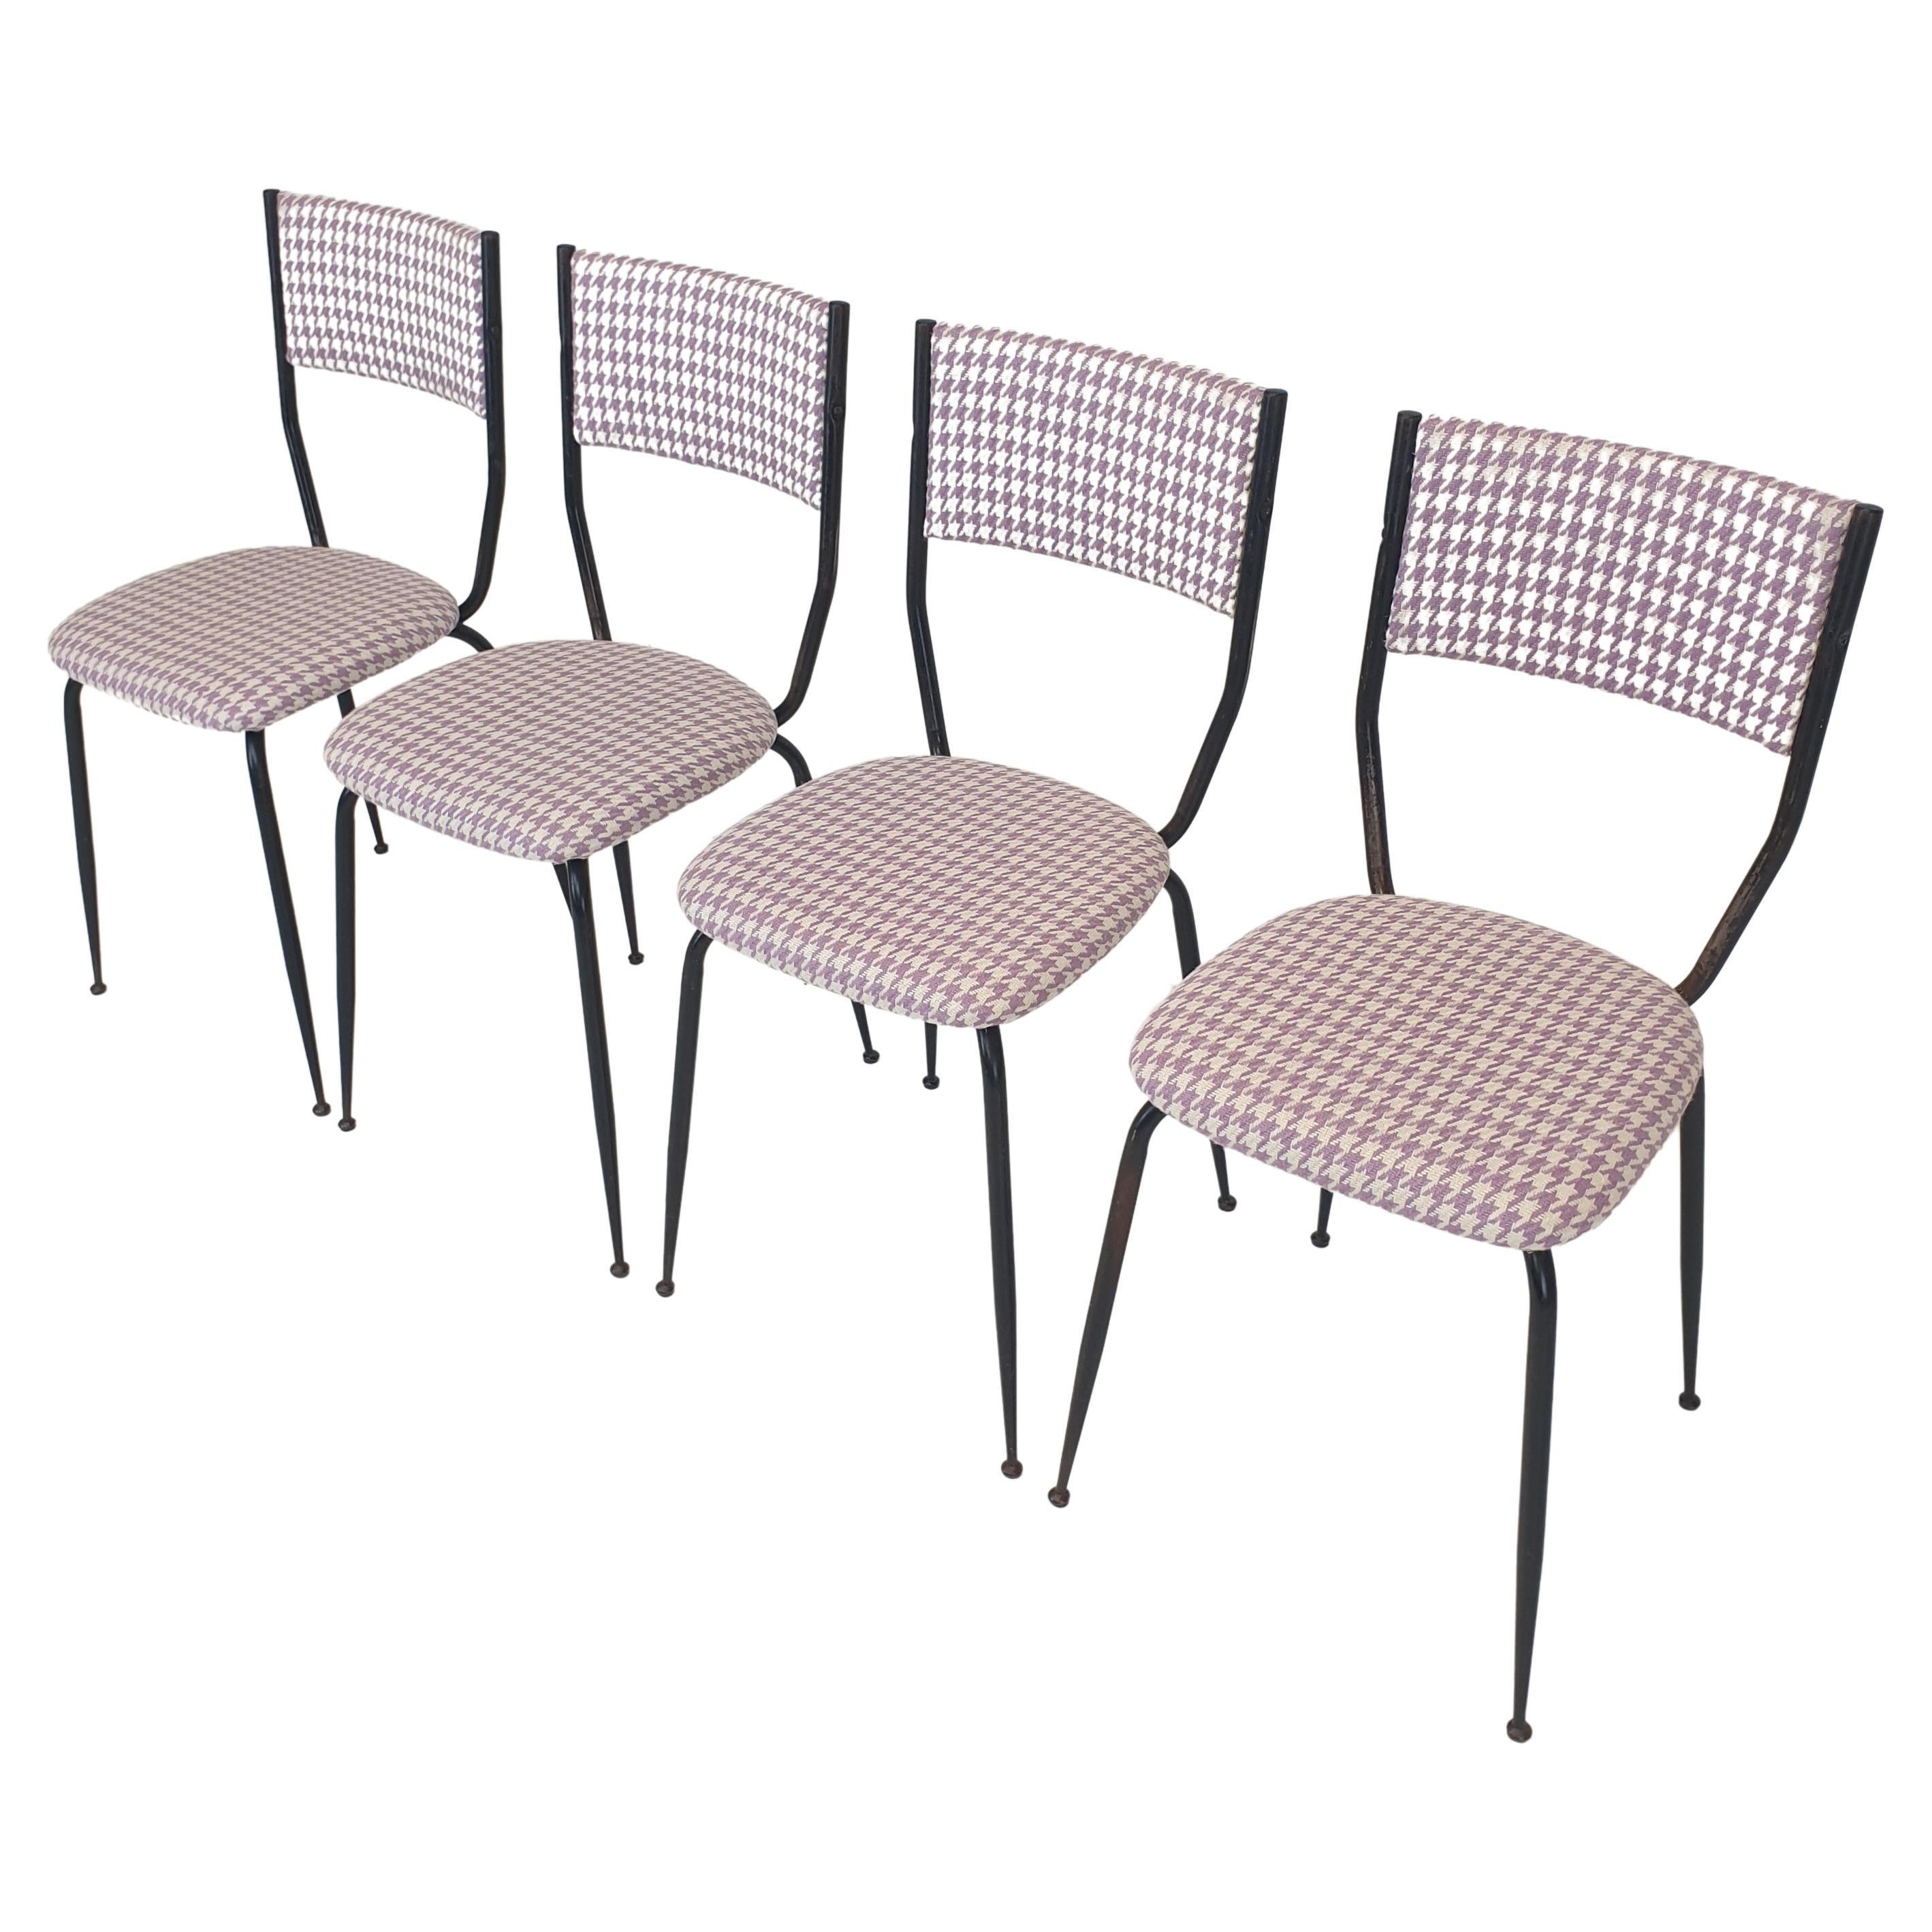 Set of 4 Italian Metal Dining Chairs, 1960's